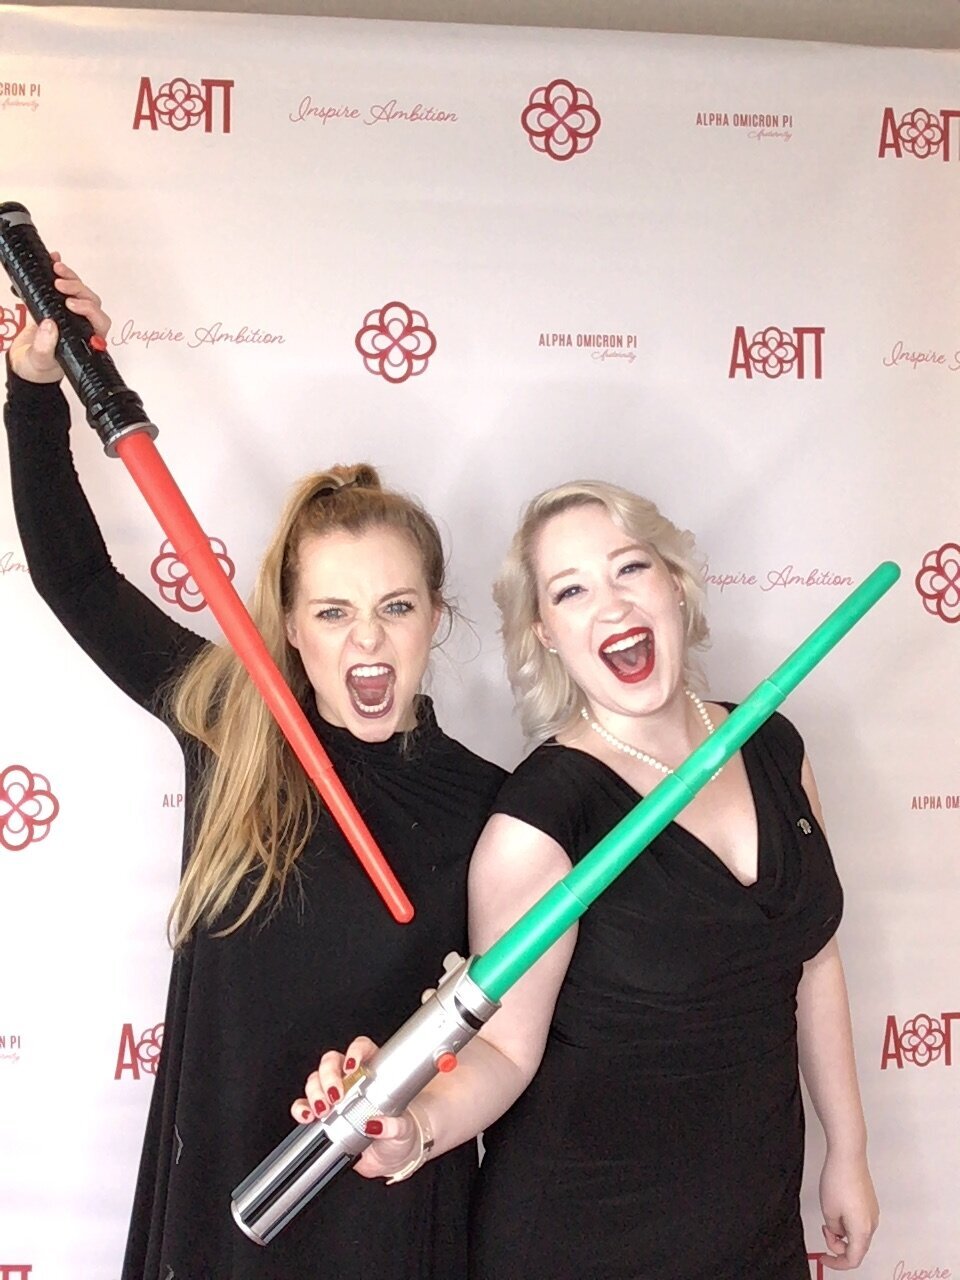 AOII sorority sisters with lightsabers in photobooth